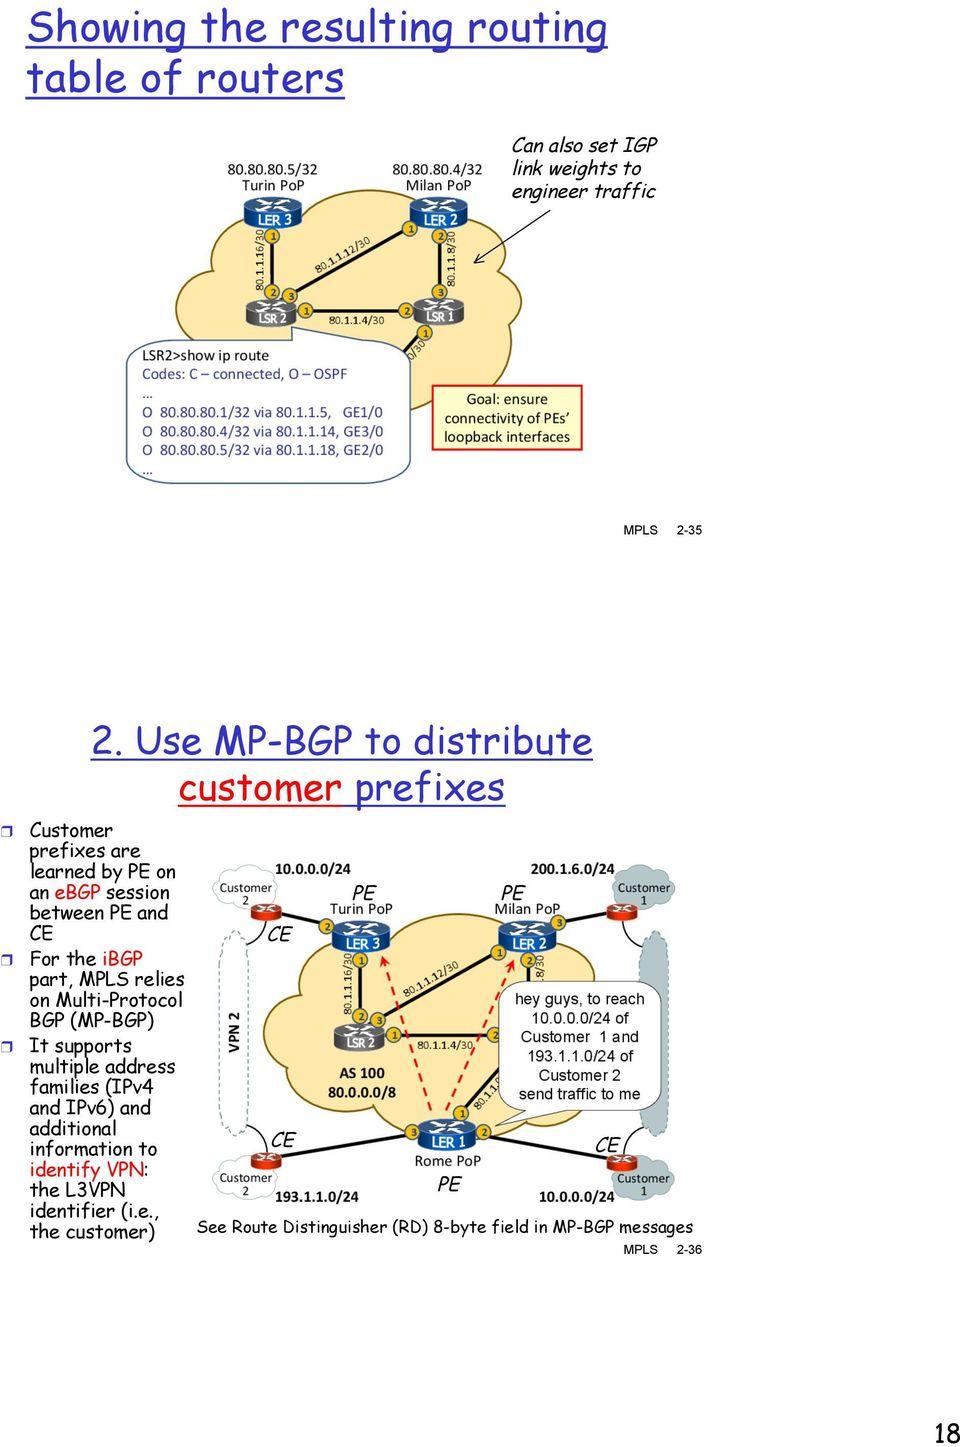 part, MPLS relies on Multi-Protocol BGP (MP-BGP) It supports multiple address families (IPv4 and IPv6) and additional information